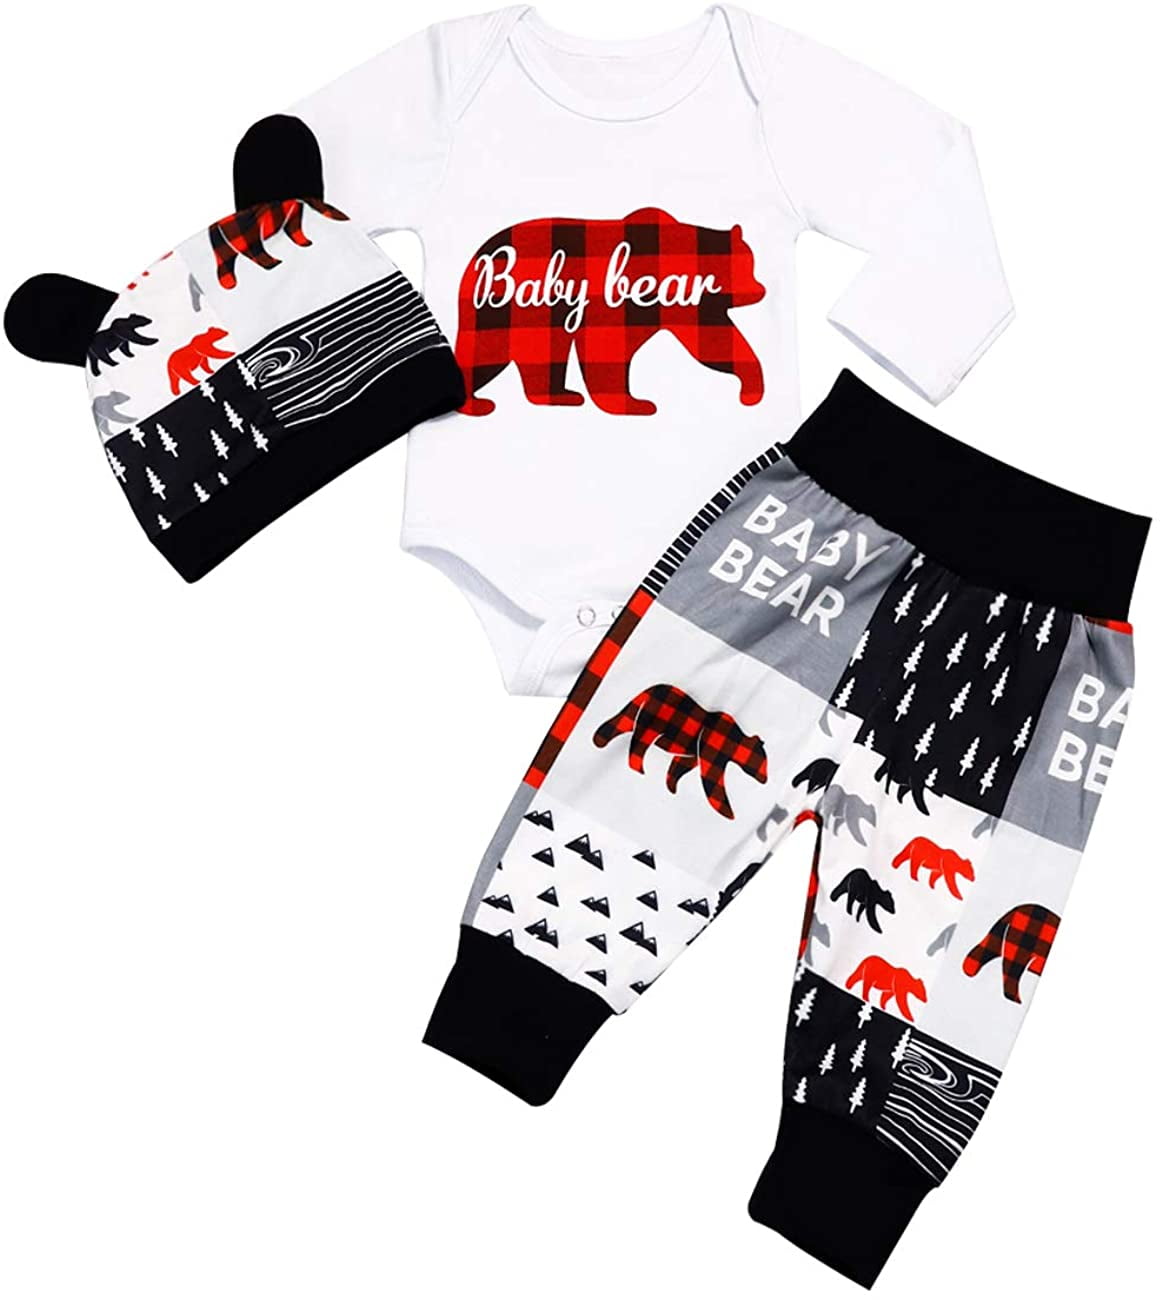 itkidboy Newborn Baby Boy Summer Clothes New to The Crew Letter Print Romper+Long Pants+Hat 3PCS Breathable Outfits Set